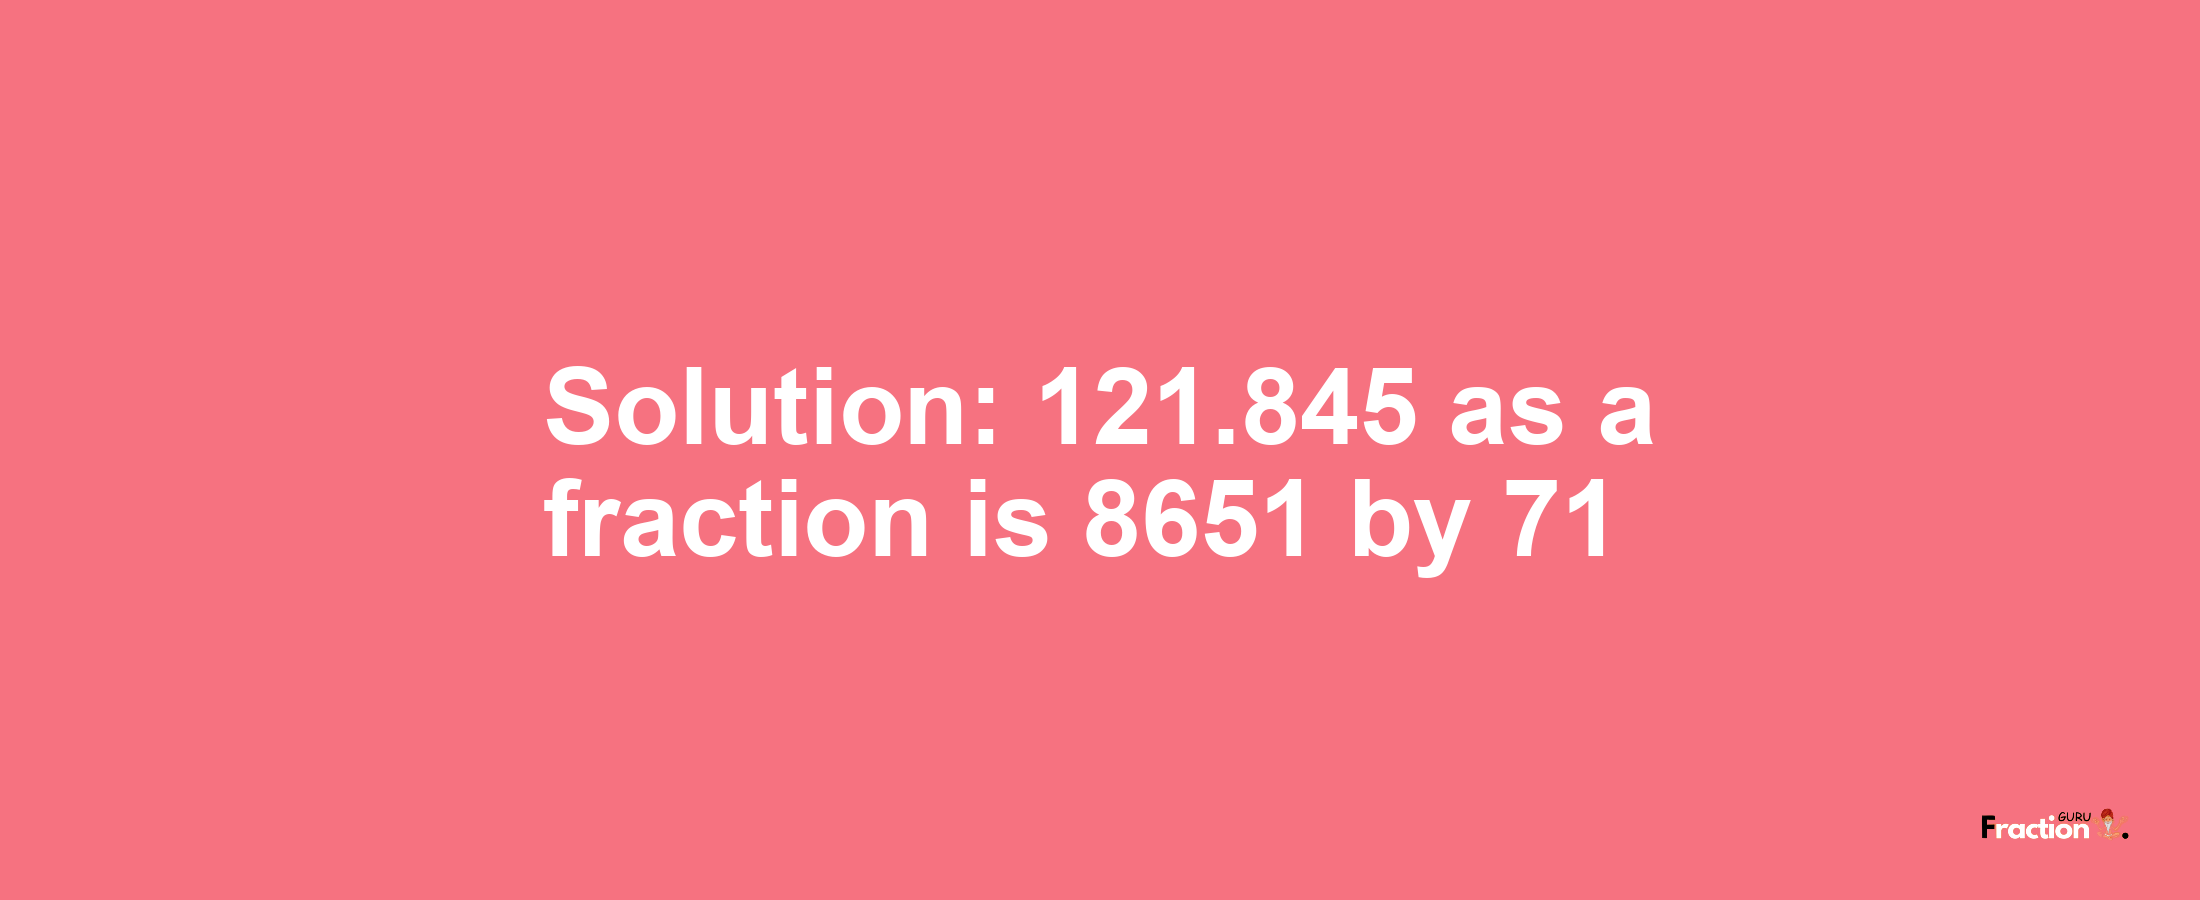 Solution:121.845 as a fraction is 8651/71